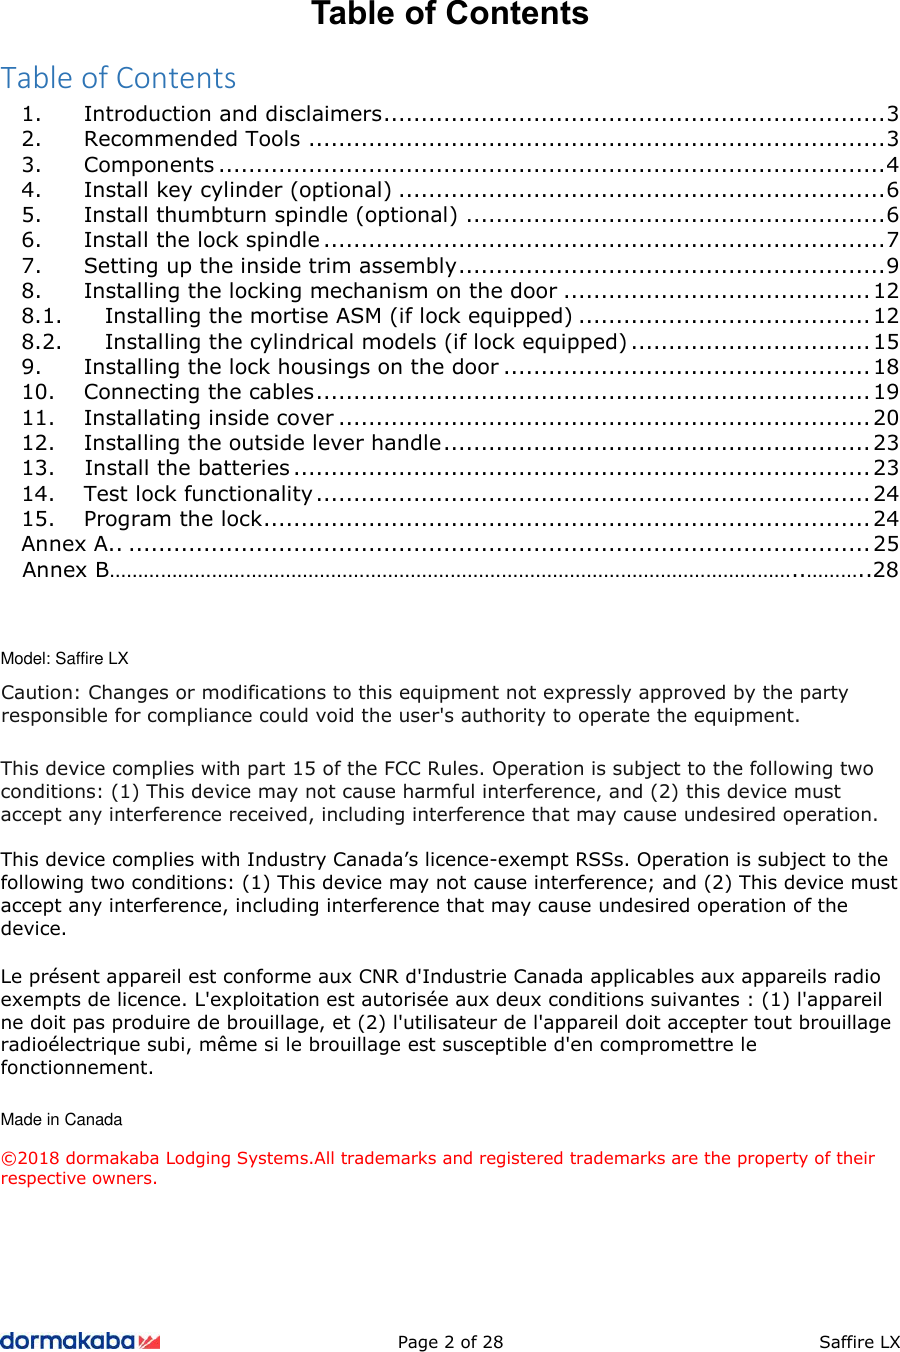 Page 2 of 28  Saffire LX Table of Contents Table of Contents 1. Introduction and disclaimers ................................................................... 32. Recommended Tools ............................................................................. 33. Components ......................................................................................... 44. Install key cylinder (optional) ................................................................. 65. Install thumbturn spindle (optional) ........................................................ 66. Install the lock spindle ........................................................................... 77. Setting up the inside trim assembly ......................................................... 98. Installing the locking mechanism on the door ......................................... 128.1. Installing the mortise ASM (if lock equipped) ....................................... 12 8.2. Installing the cylindrical models (if lock equipped) ................................ 15 9. Installing the lock housings on the door ................................................. 1810. Connecting the cables .......................................................................... 1911. Installating inside cover ....................................................................... 2012. Installing the outside lever handle ......................................................... 2313. Install the batteries ............................................................................. 2314. Test lock functionality .......................................................................... 2415. Program the lock ................................................................................. 24Annex A.. ................................................................................................... 25    Annex B…………………………………………………………………………………………………………..………..28 Model: Saffire LX This device complies with part 15 of the FCC Rules. Operation is subject to the following two conditions: (1) This device may not cause harmful interference, and (2) this device must accept any interference received, including interference that may cause undesired operation. This device complies with Industry Canada’s licence-exempt RSSs. Operation is subject to the following two conditions: (1) This device may not cause interference; and (2) This device must accept any interference, including interference that may cause undesired operation of the device. Le présent appareil est conforme aux CNR d&apos;Industrie Canada applicables aux appareils radio exempts de licence. L&apos;exploitation est autorisée aux deux conditions suivantes : (1) l&apos;appareil ne doit pas produire de brouillage, et (2) l&apos;utilisateur de l&apos;appareil doit accepter tout brouillage radioélectrique subi, même si le brouillage est susceptible d&apos;en compromettre le fonctionnement. Made in Canada ©2018 dormakaba Lodging Systems.All trademarks and registered trademarks are the property of their respective owners. Caution: Changes or modifications to this equipment not expressly approved by the party responsible for compliance could void the user&apos;s authority to operate the equipment. 